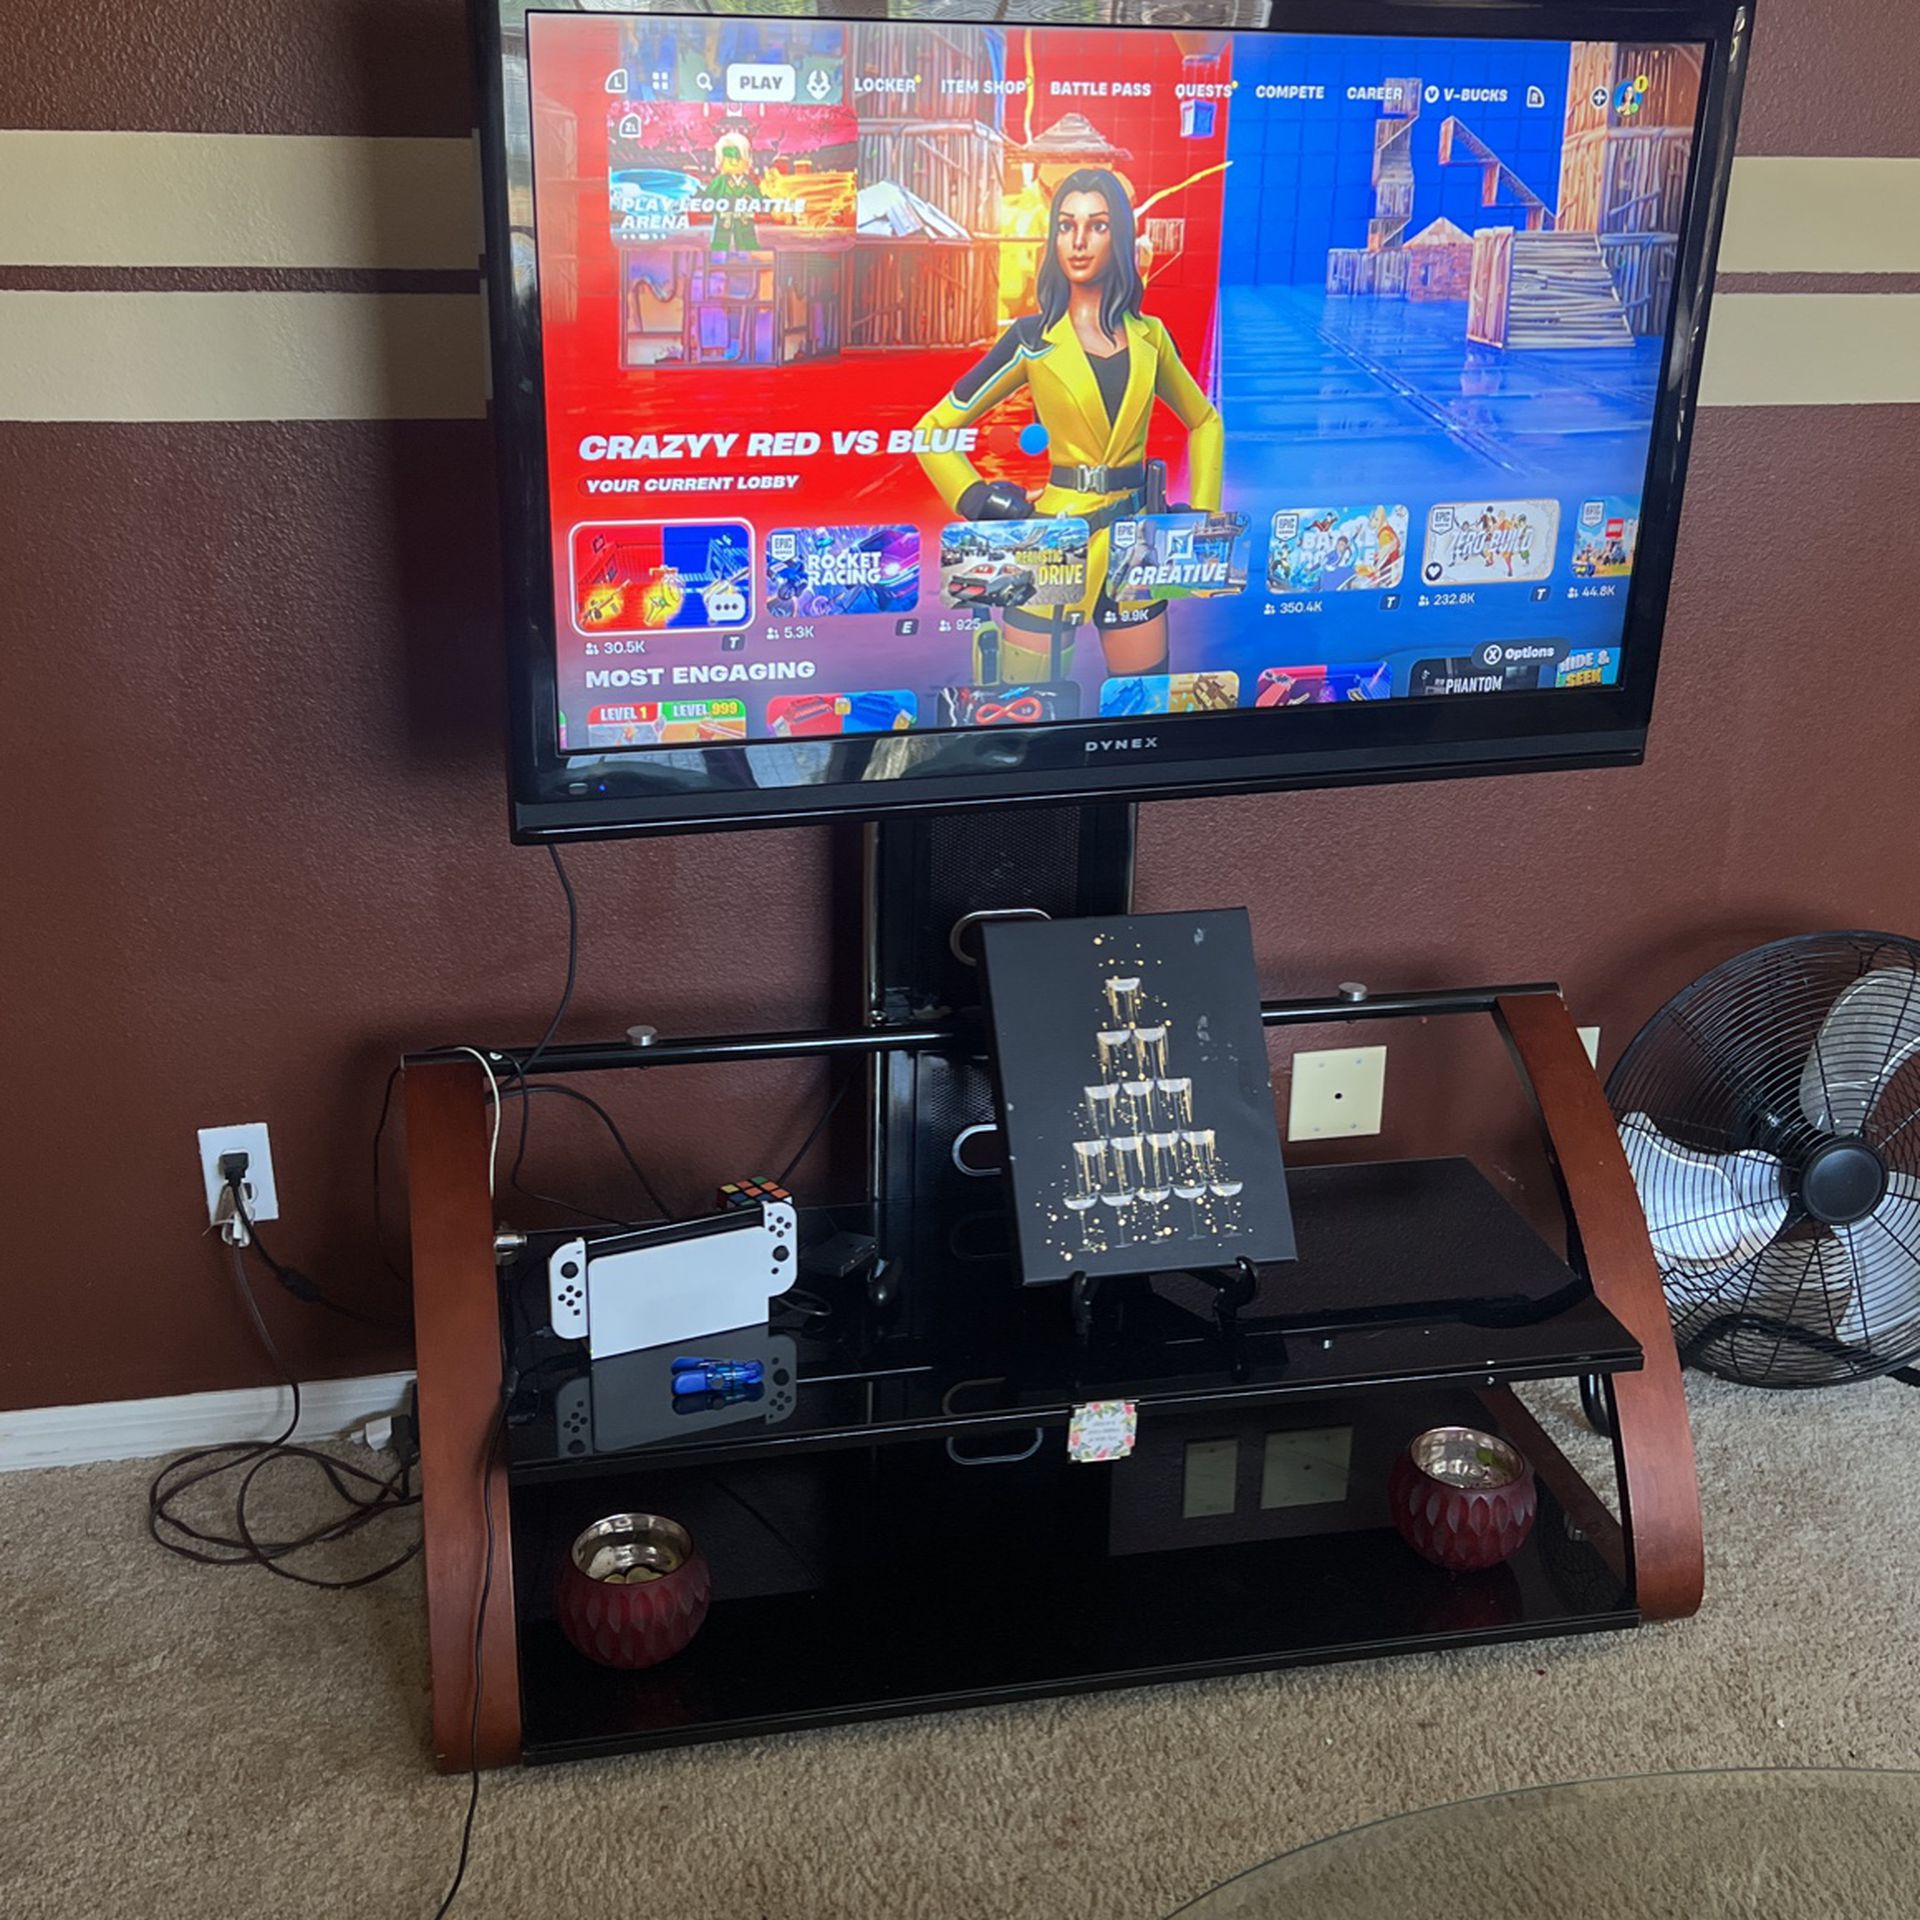 Dynex 46 “ Tv Plus Stand FOR SALE 